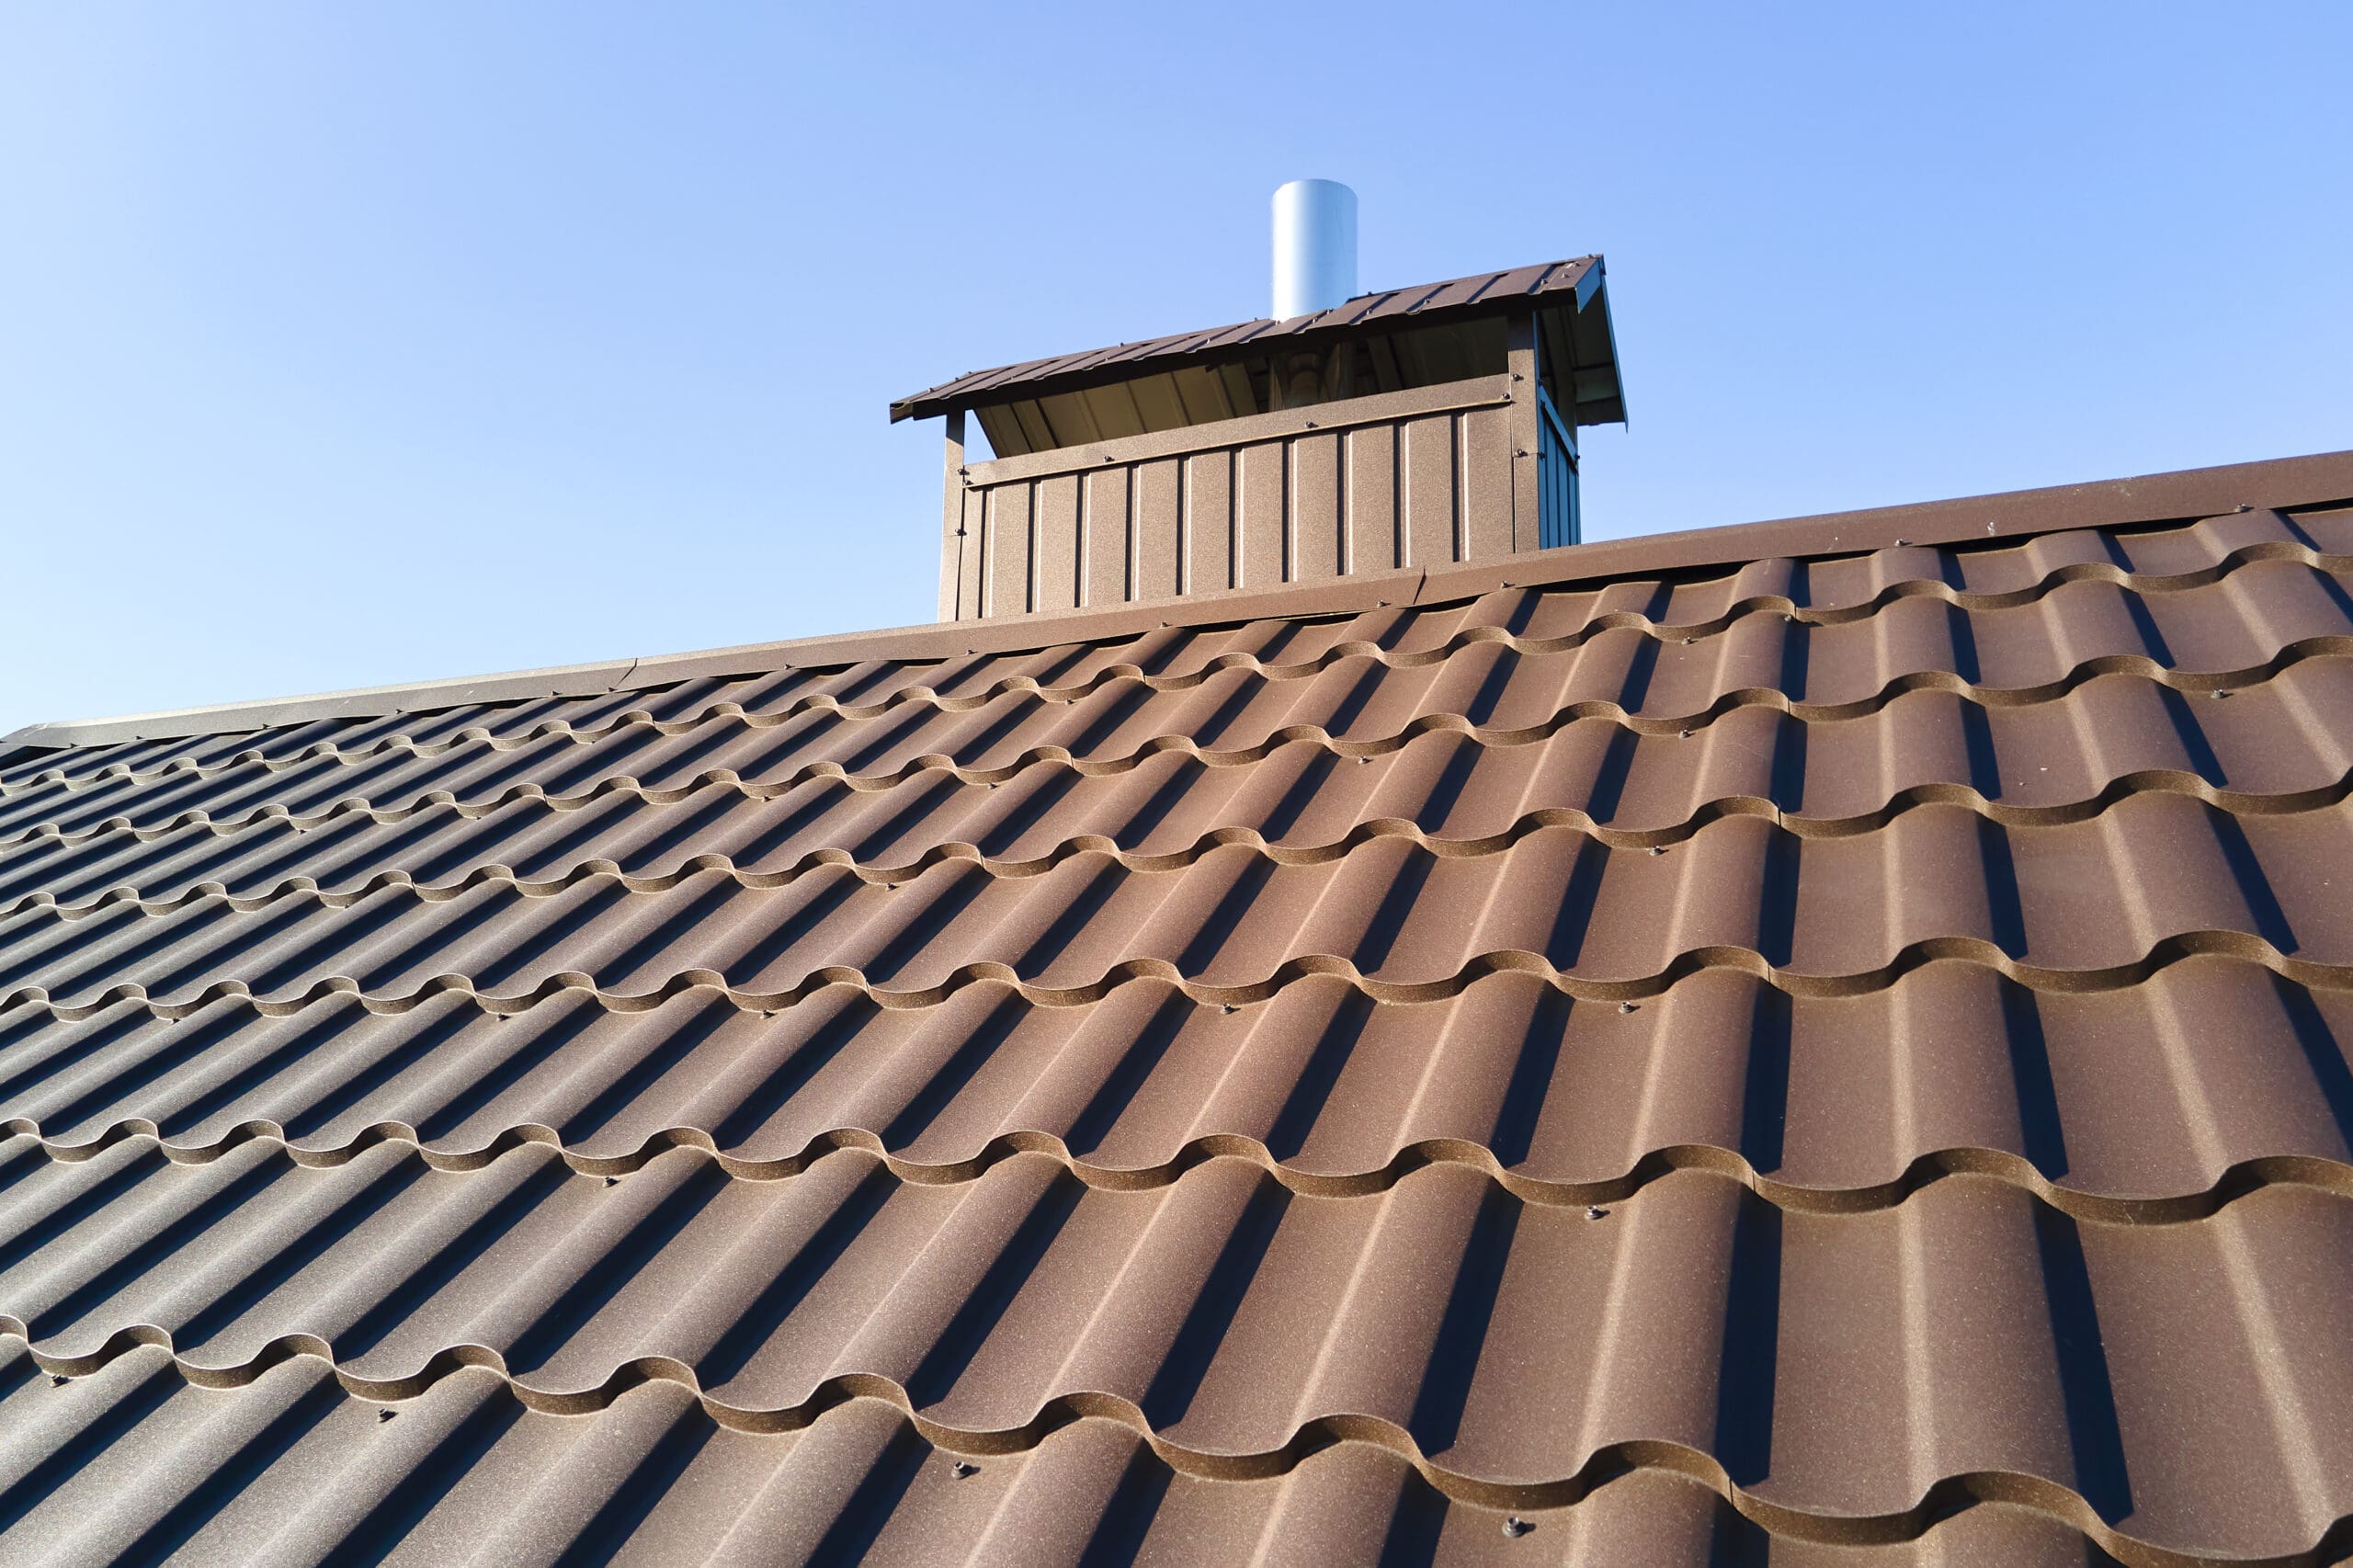 How to Improve the Roof Durability of Your Martinsburg Home